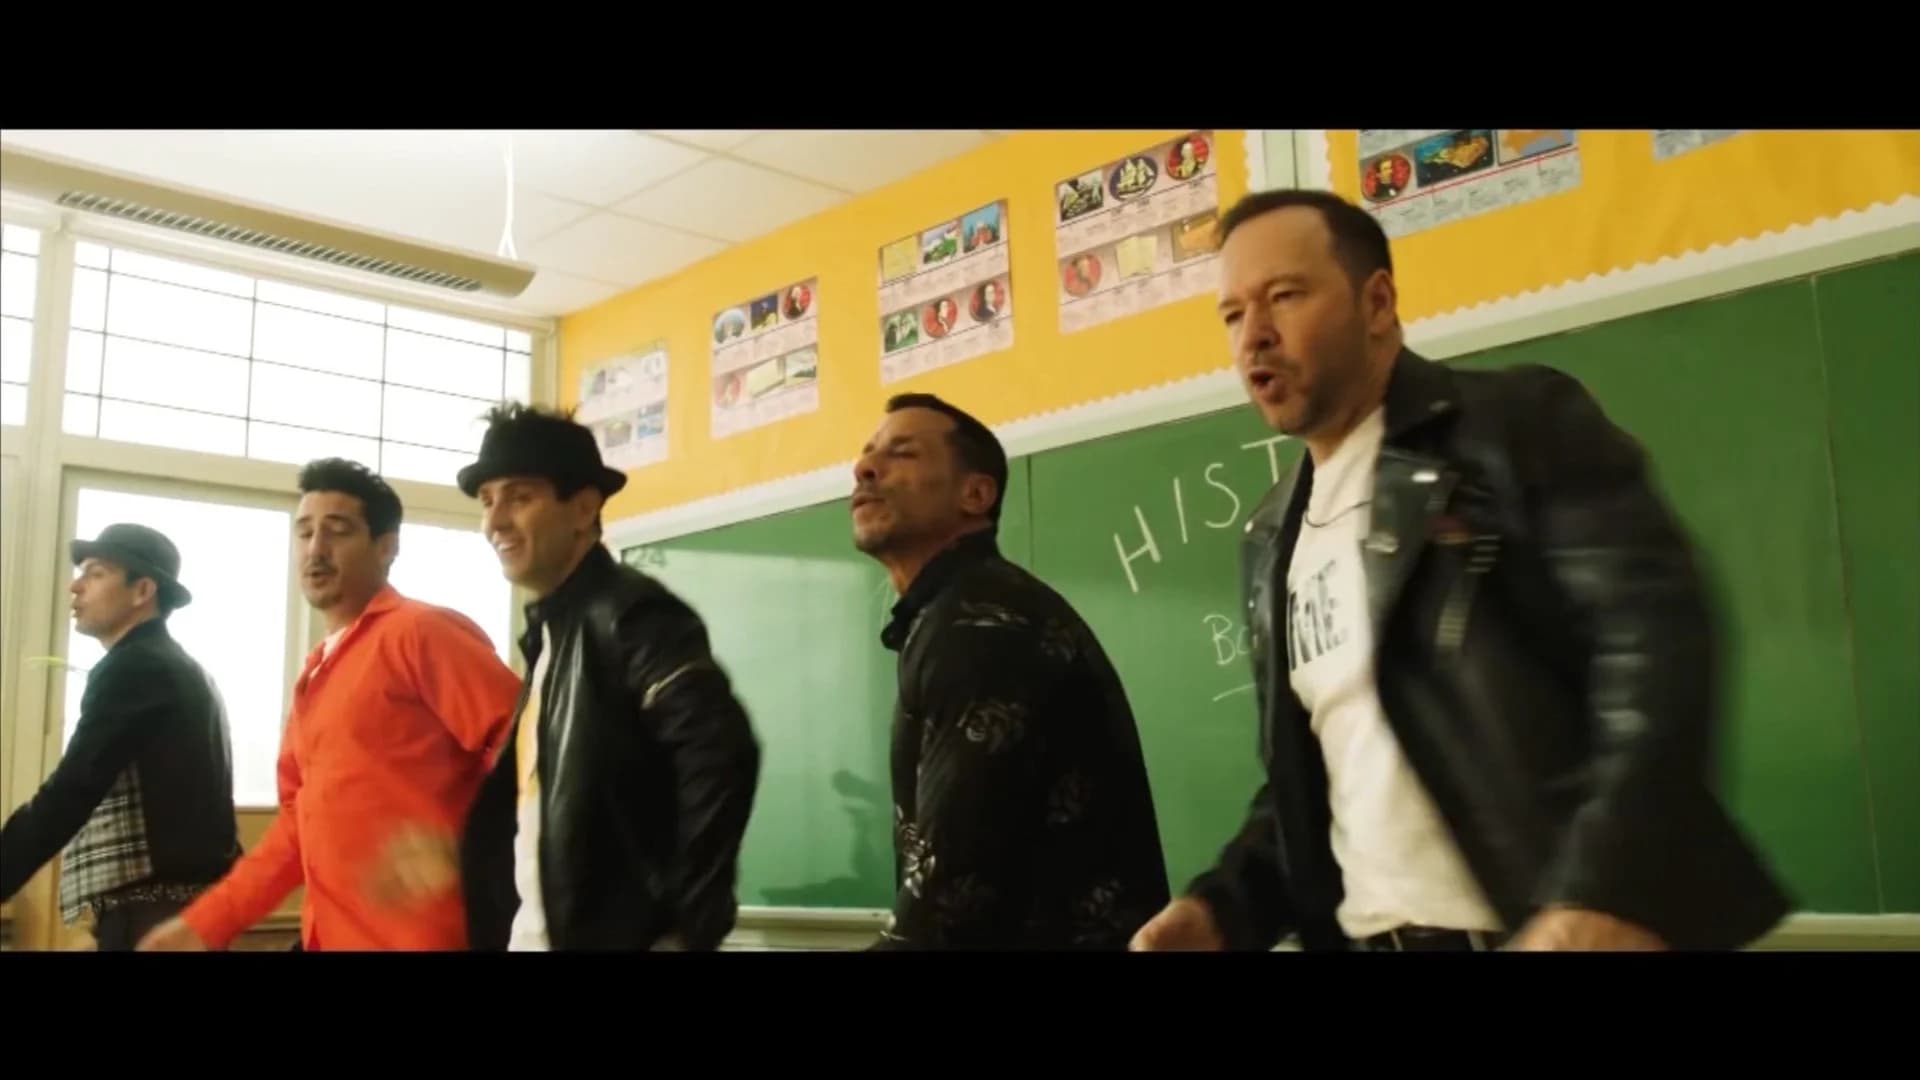 Surprise, surprise -- New Kids on the Block video filmed at New Jersey high school